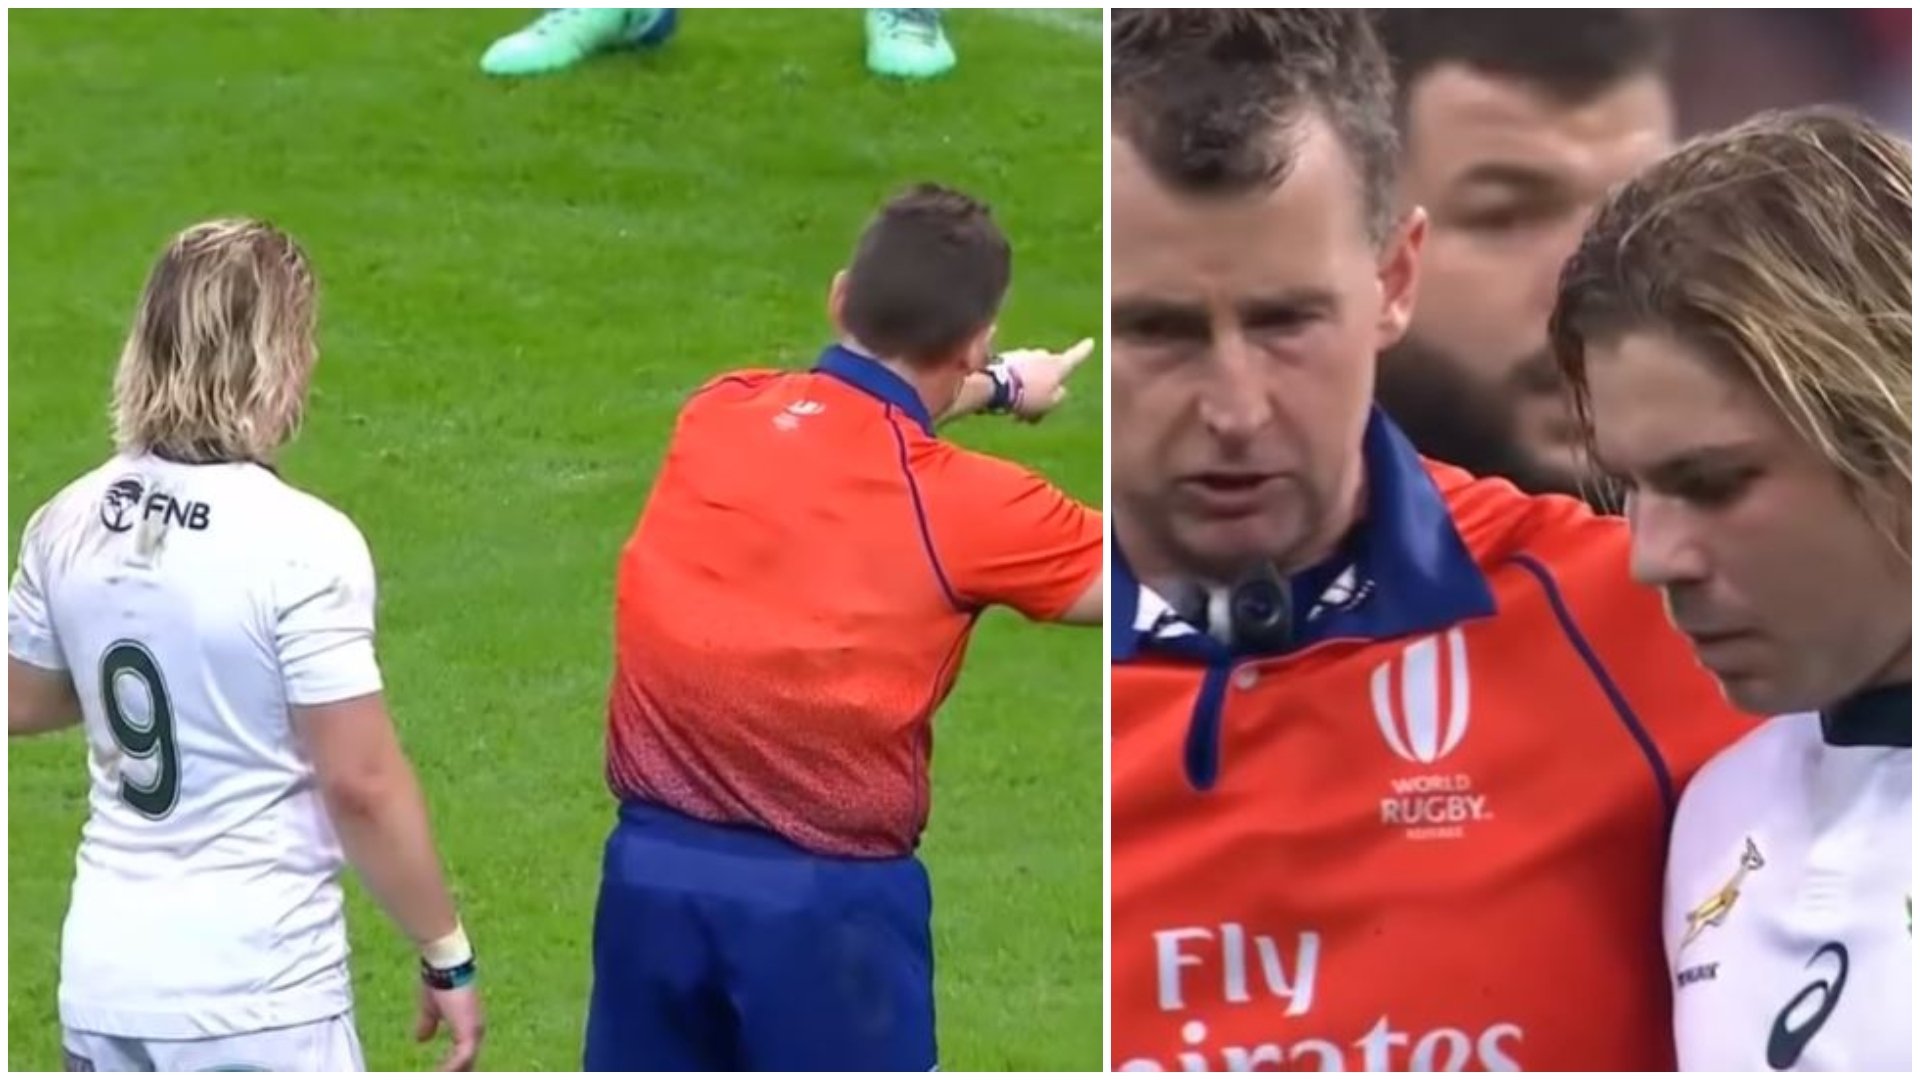 VIDEO: Many missed it but Nigel Owen reffed the **** out of France versus South Africa